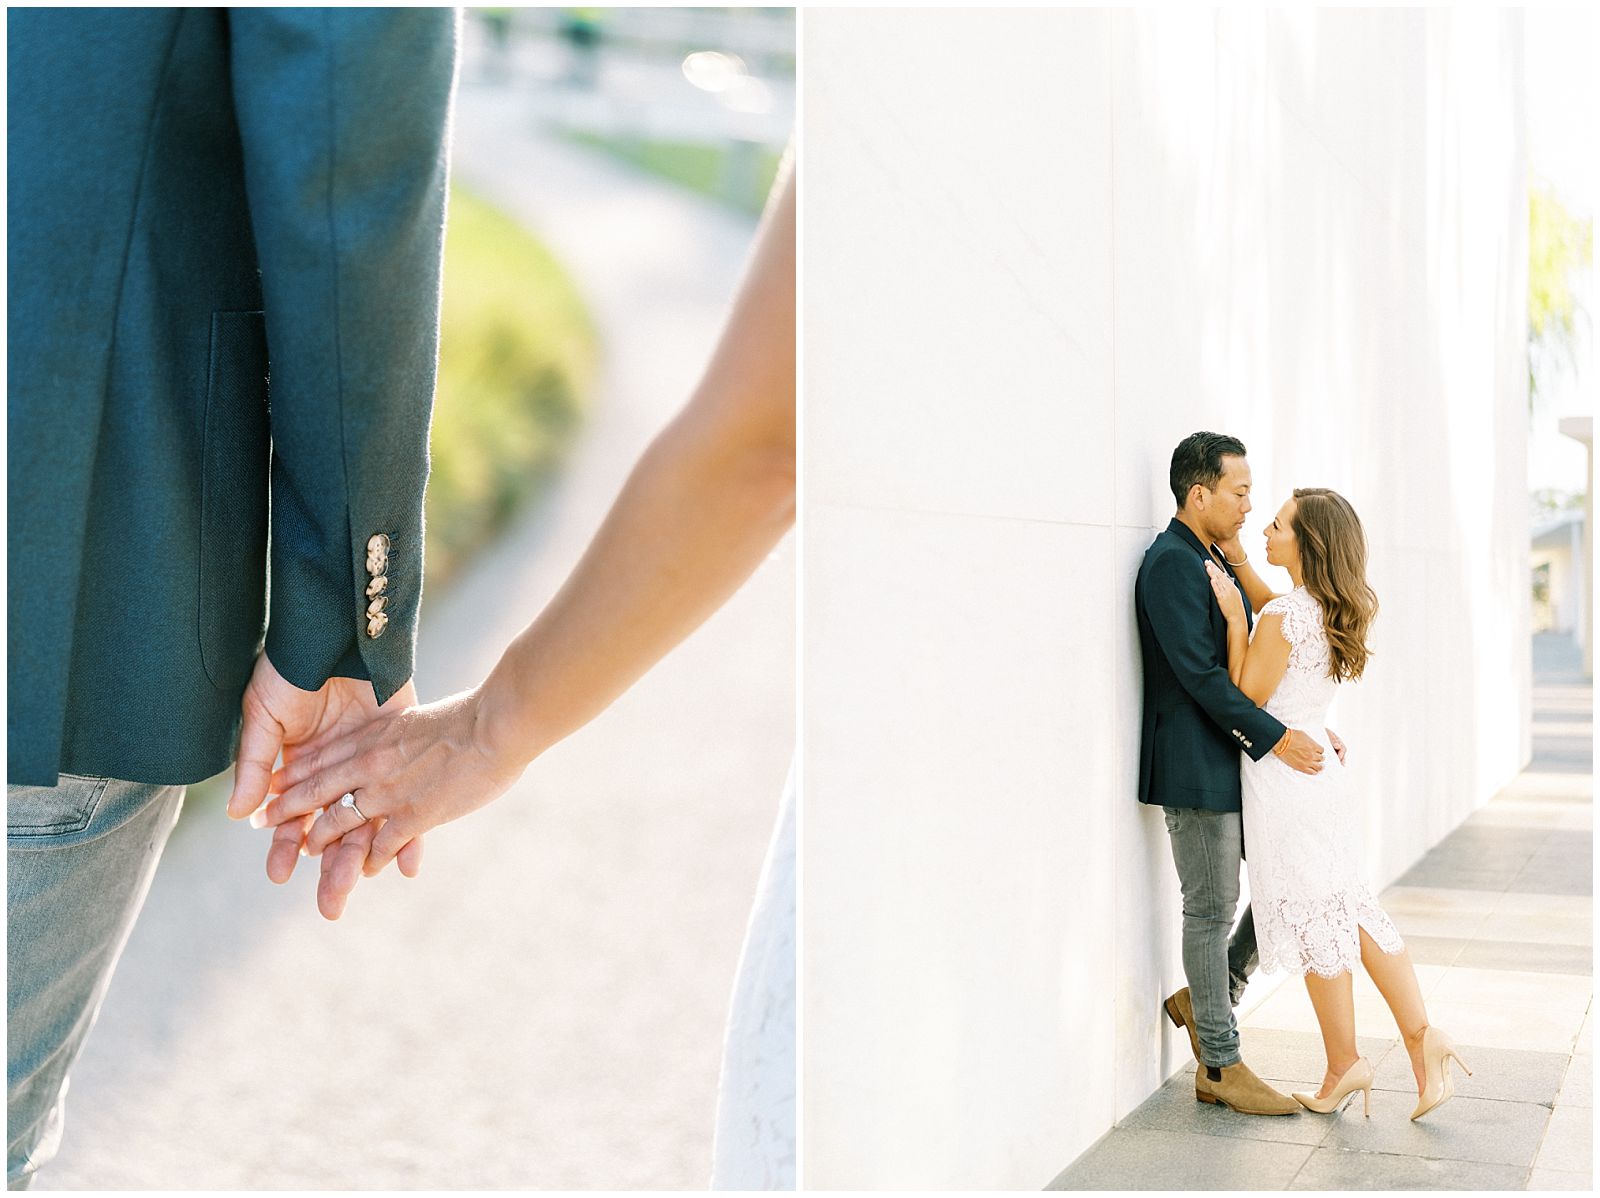 The REACH at the Kennedy Center engagement photography